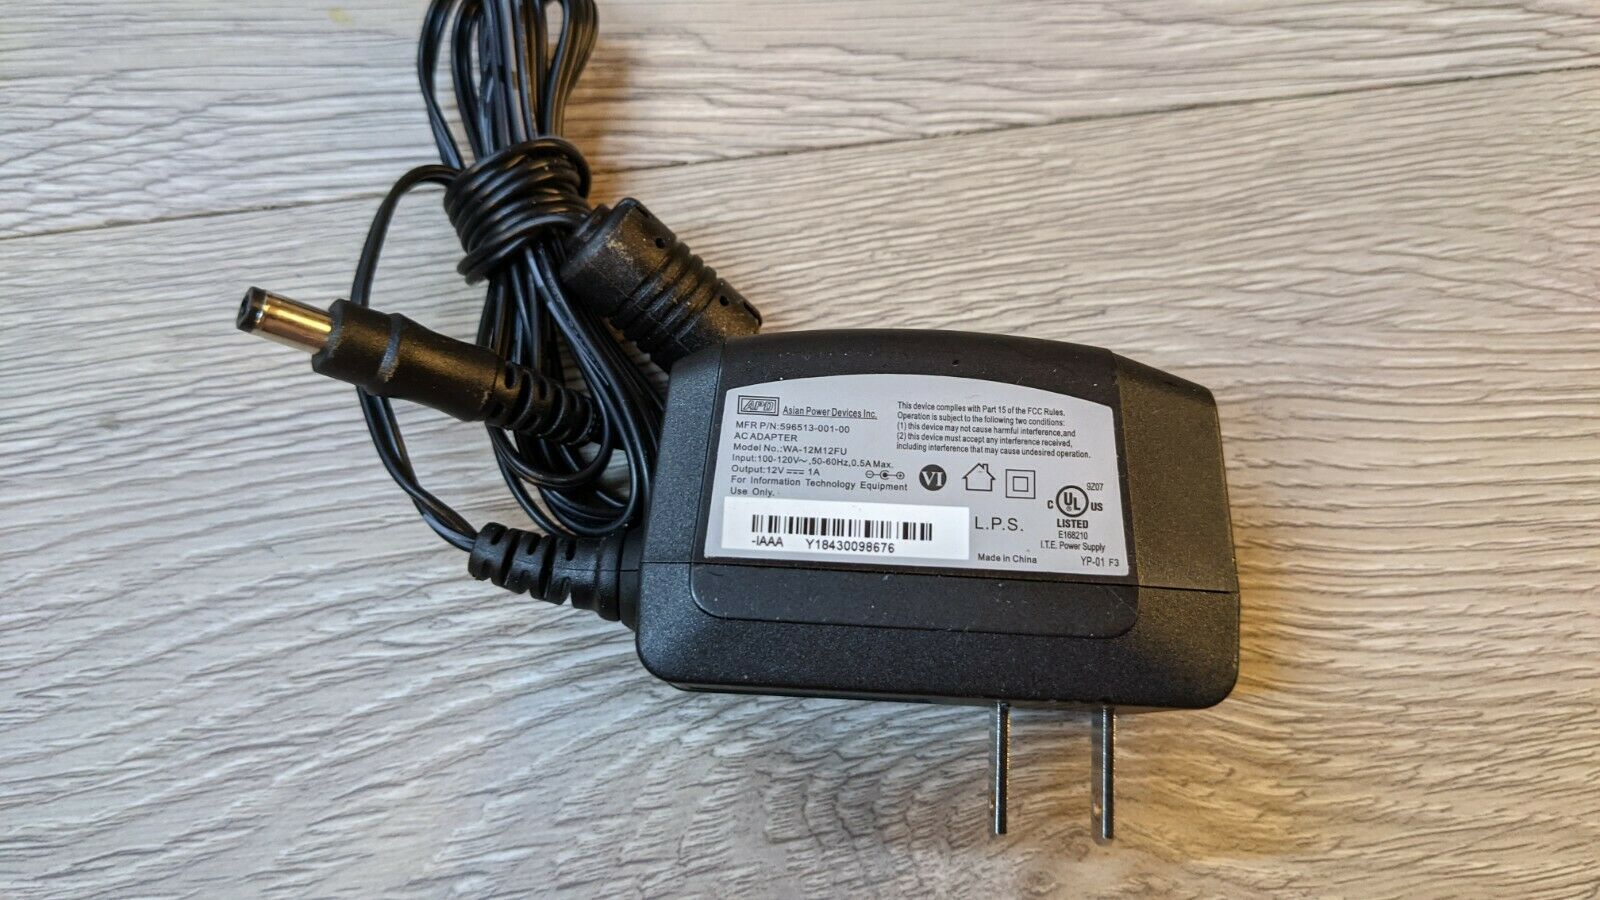 12V Asian Power Devices APD WA-12M12FU AC Adapter Power Supply Connection Split/Duplication: 1:2